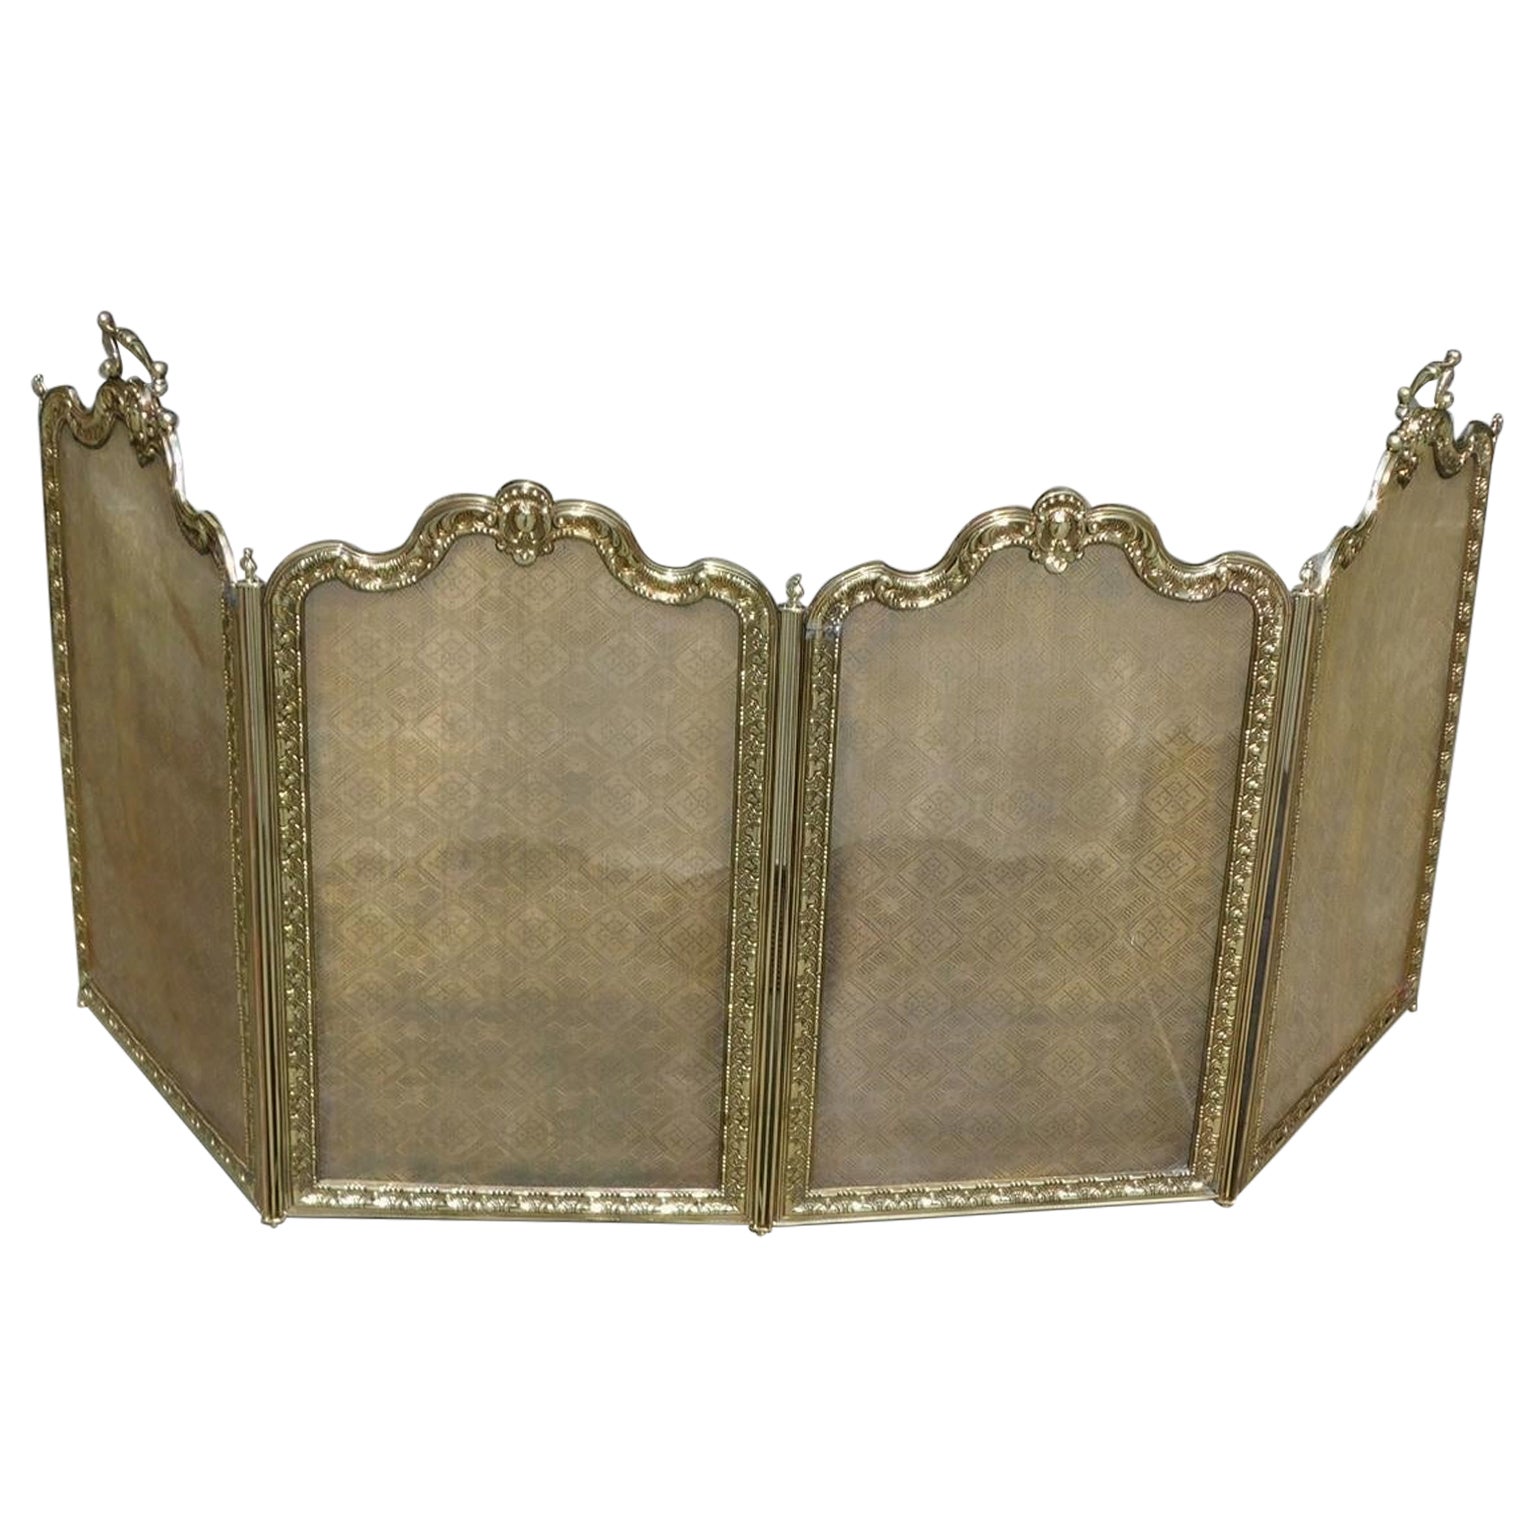 French Brass Serpentine Four Panel Decorative Foliage Fire Place Screen, C. 1830 For Sale